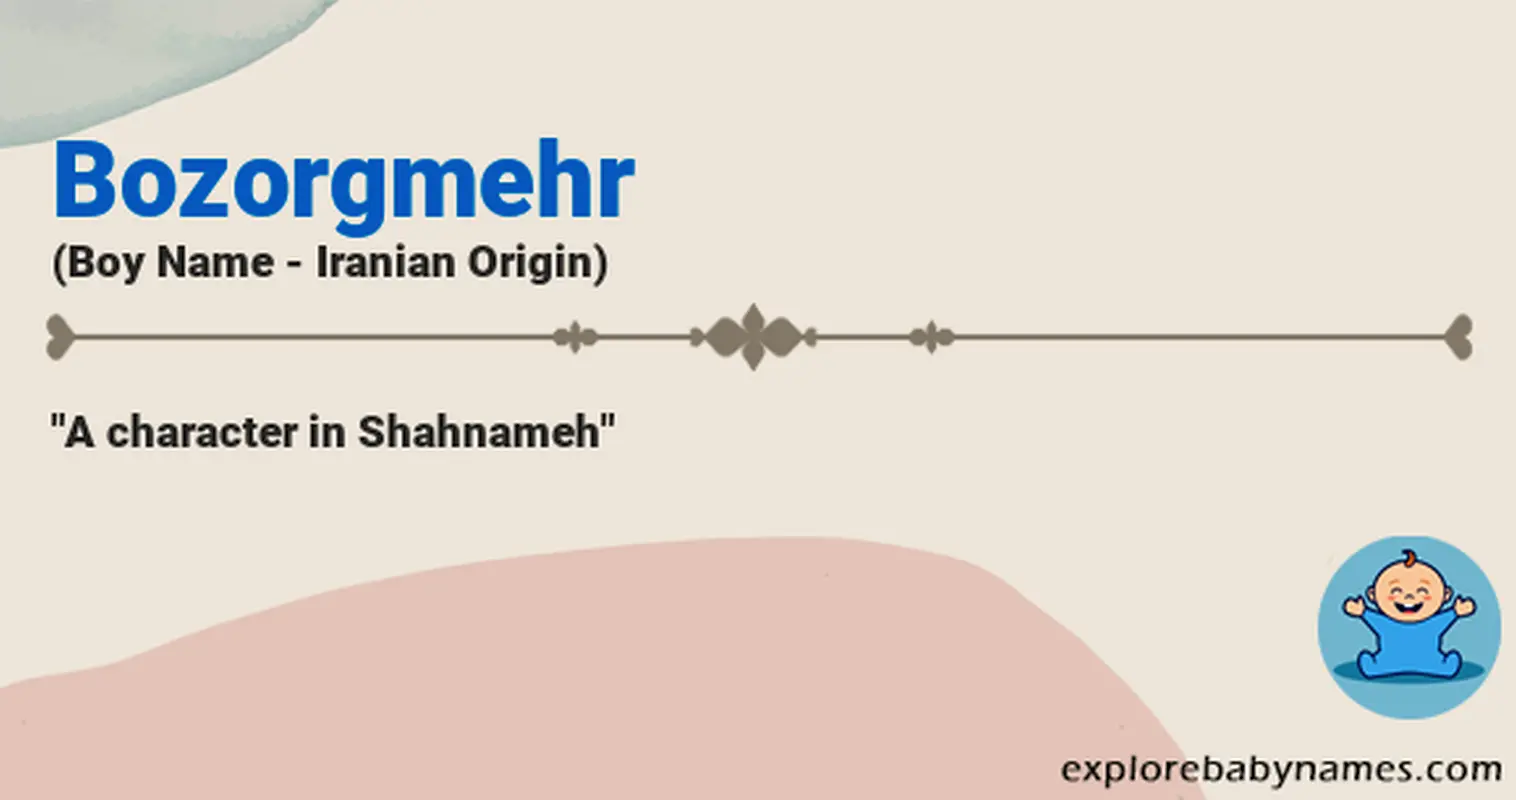 Meaning of Bozorgmehr